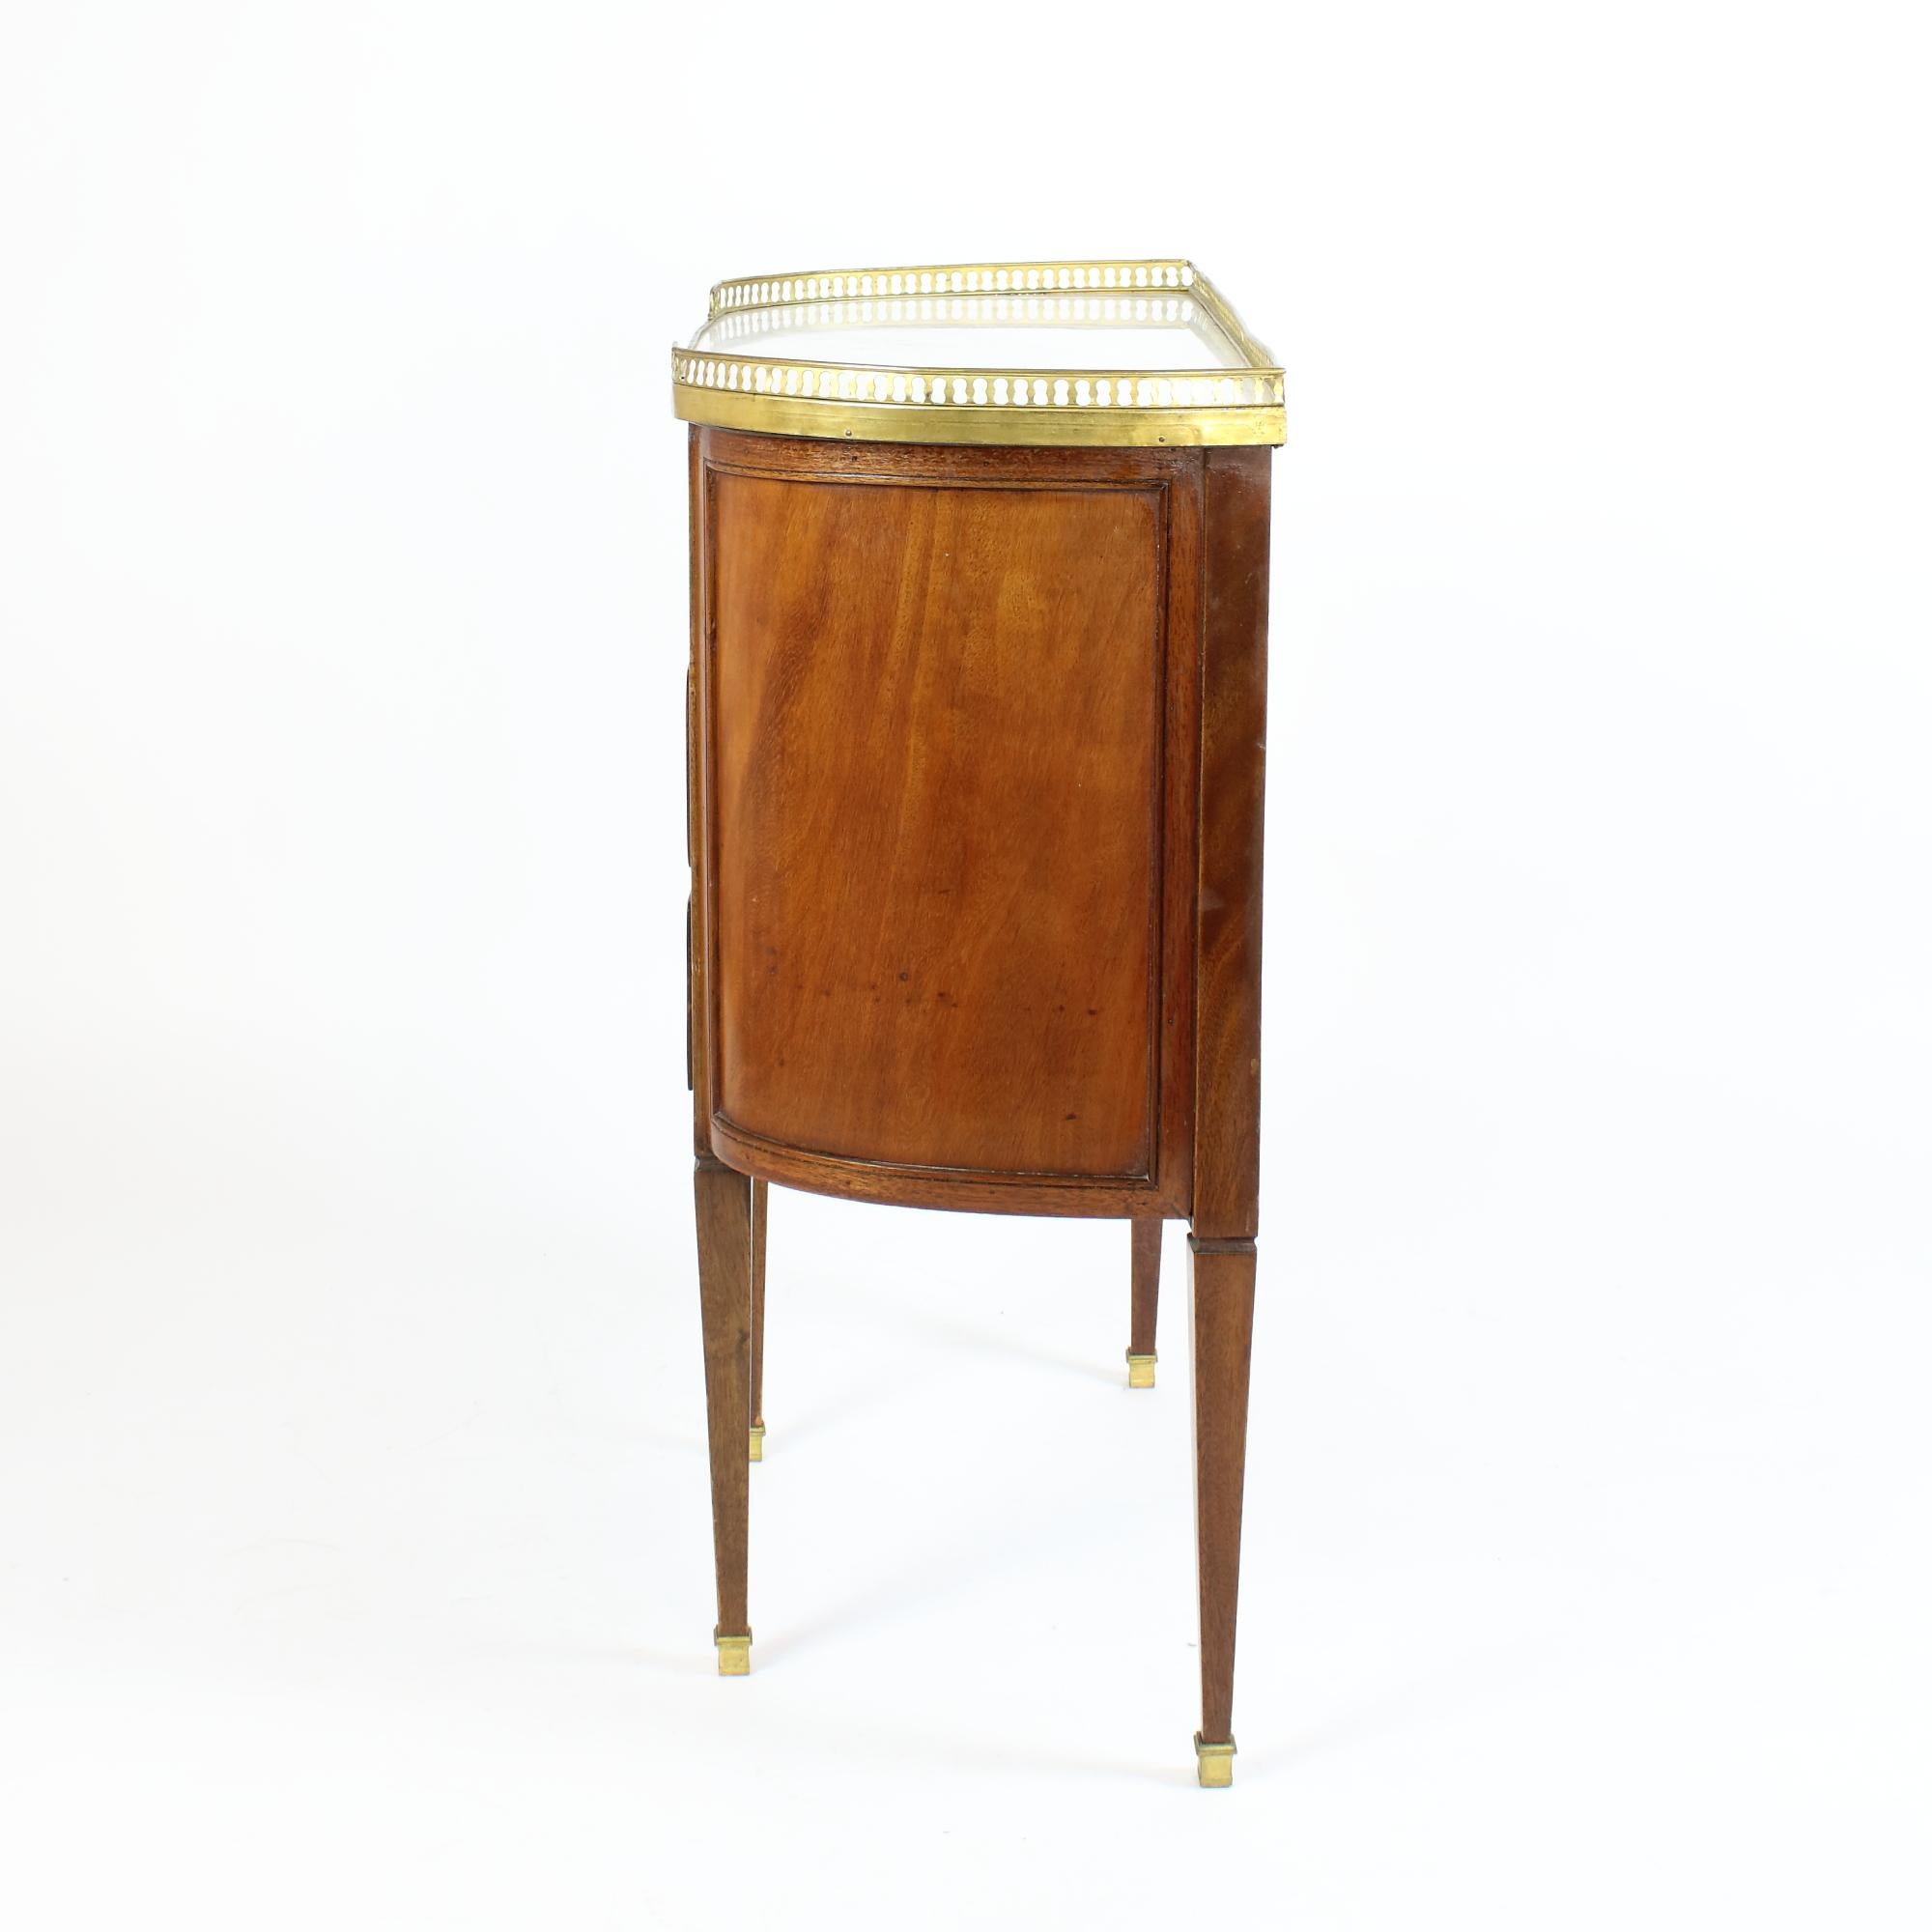 Late 18th Century Louis XVI Walnut Demilune Commode or Table Chiffonière For Sale 1